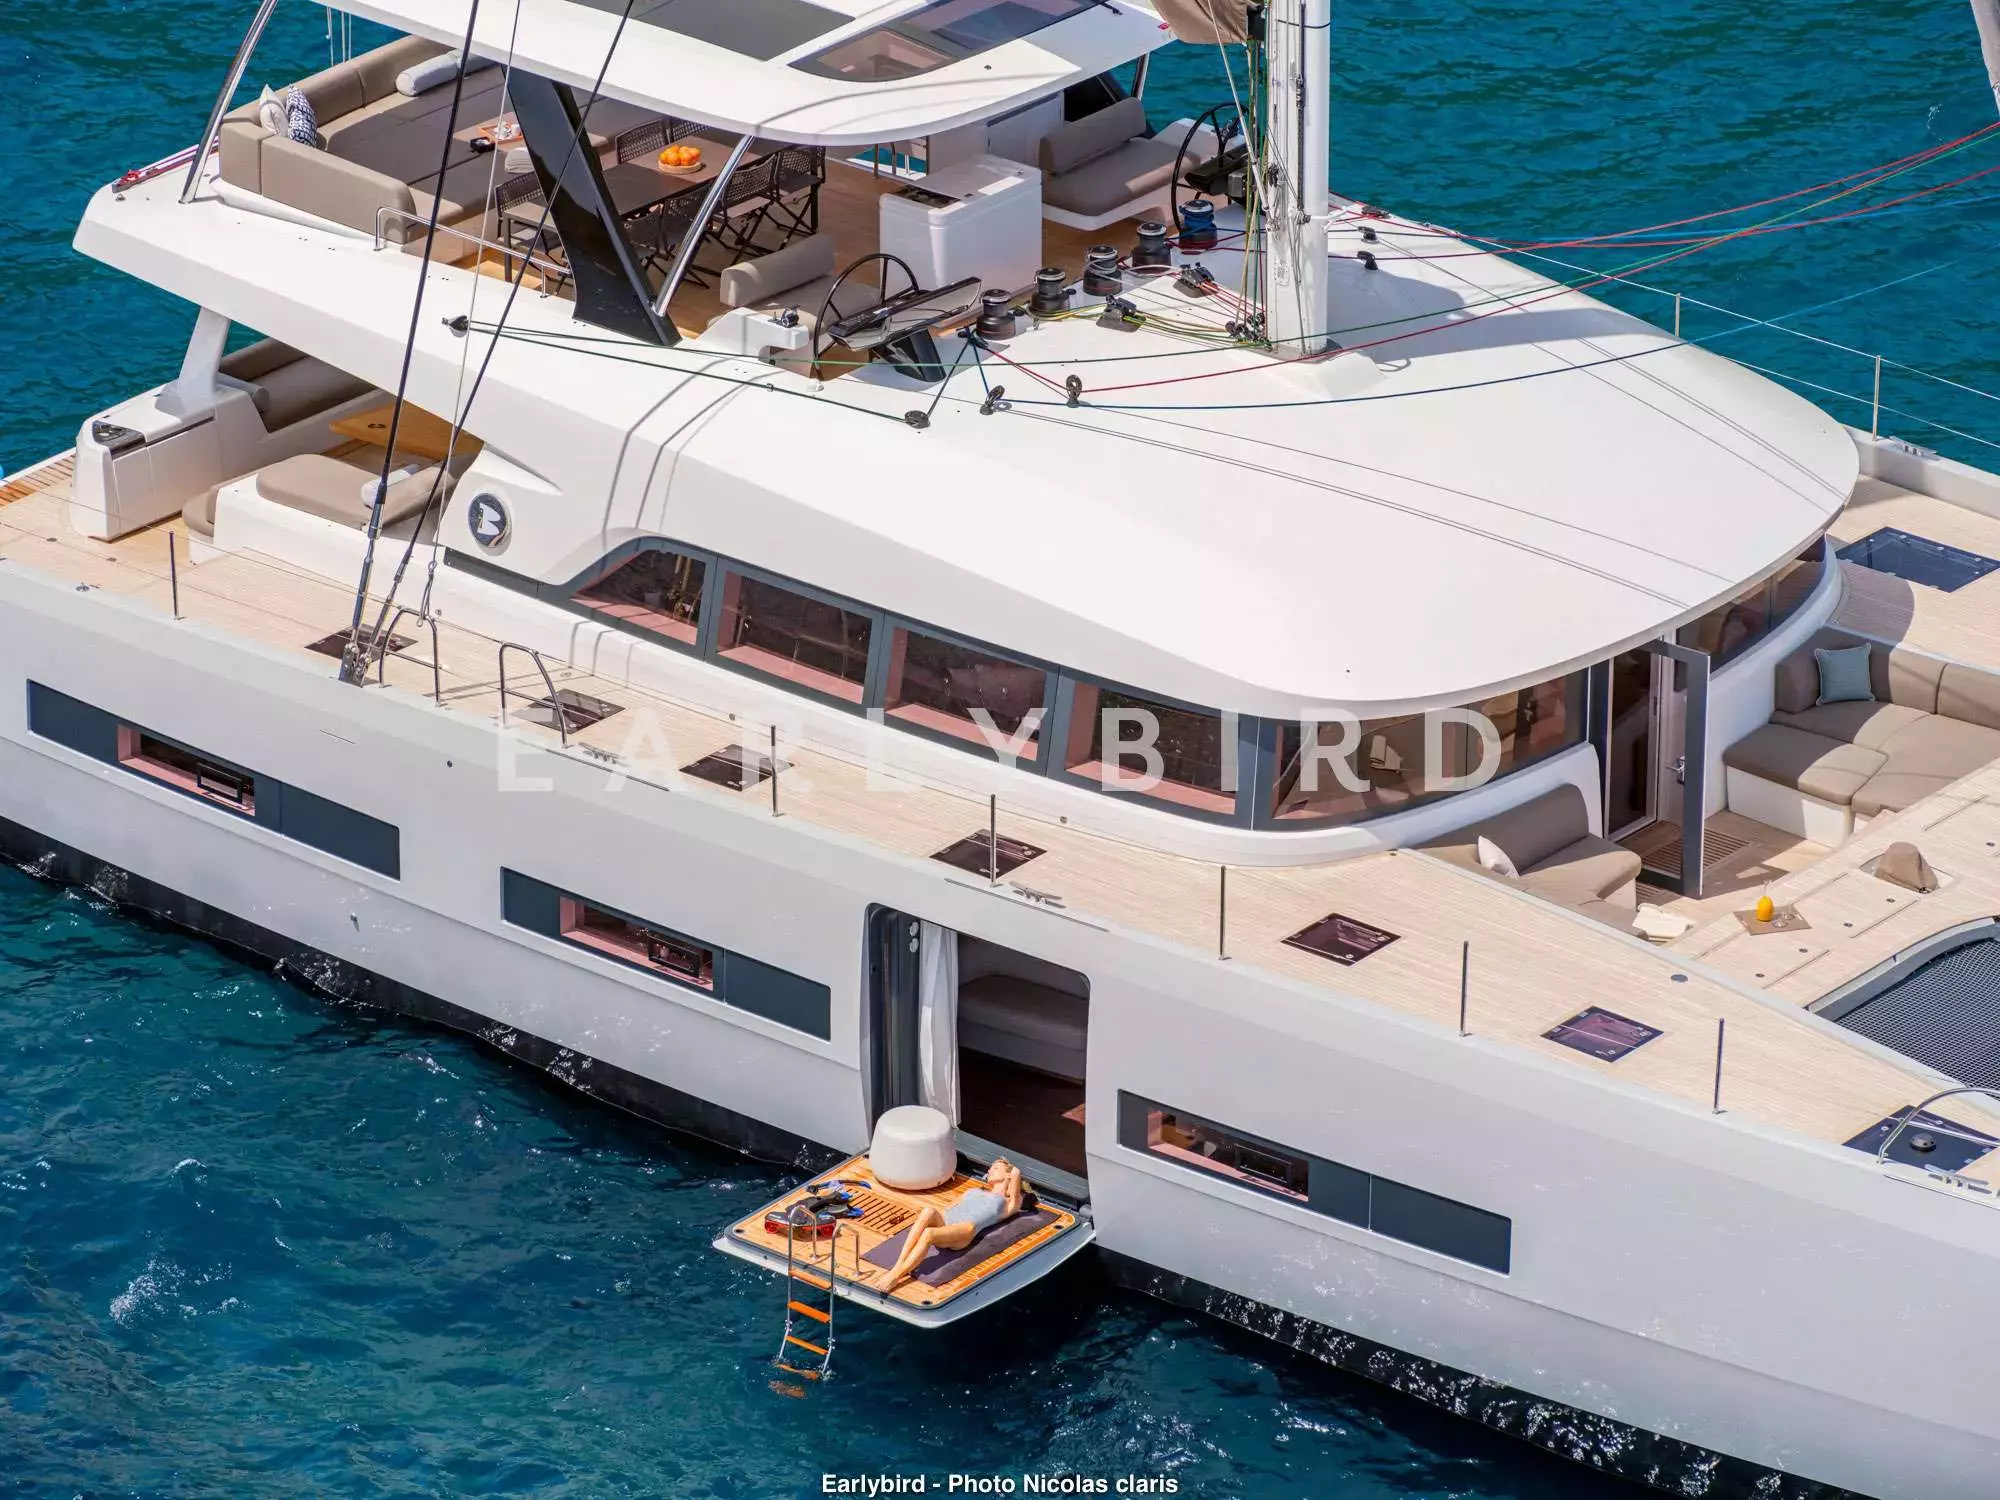 Earlybird by Lagoon - Special Offer for a private Luxury Catamaran Charter in Corsica with a crew